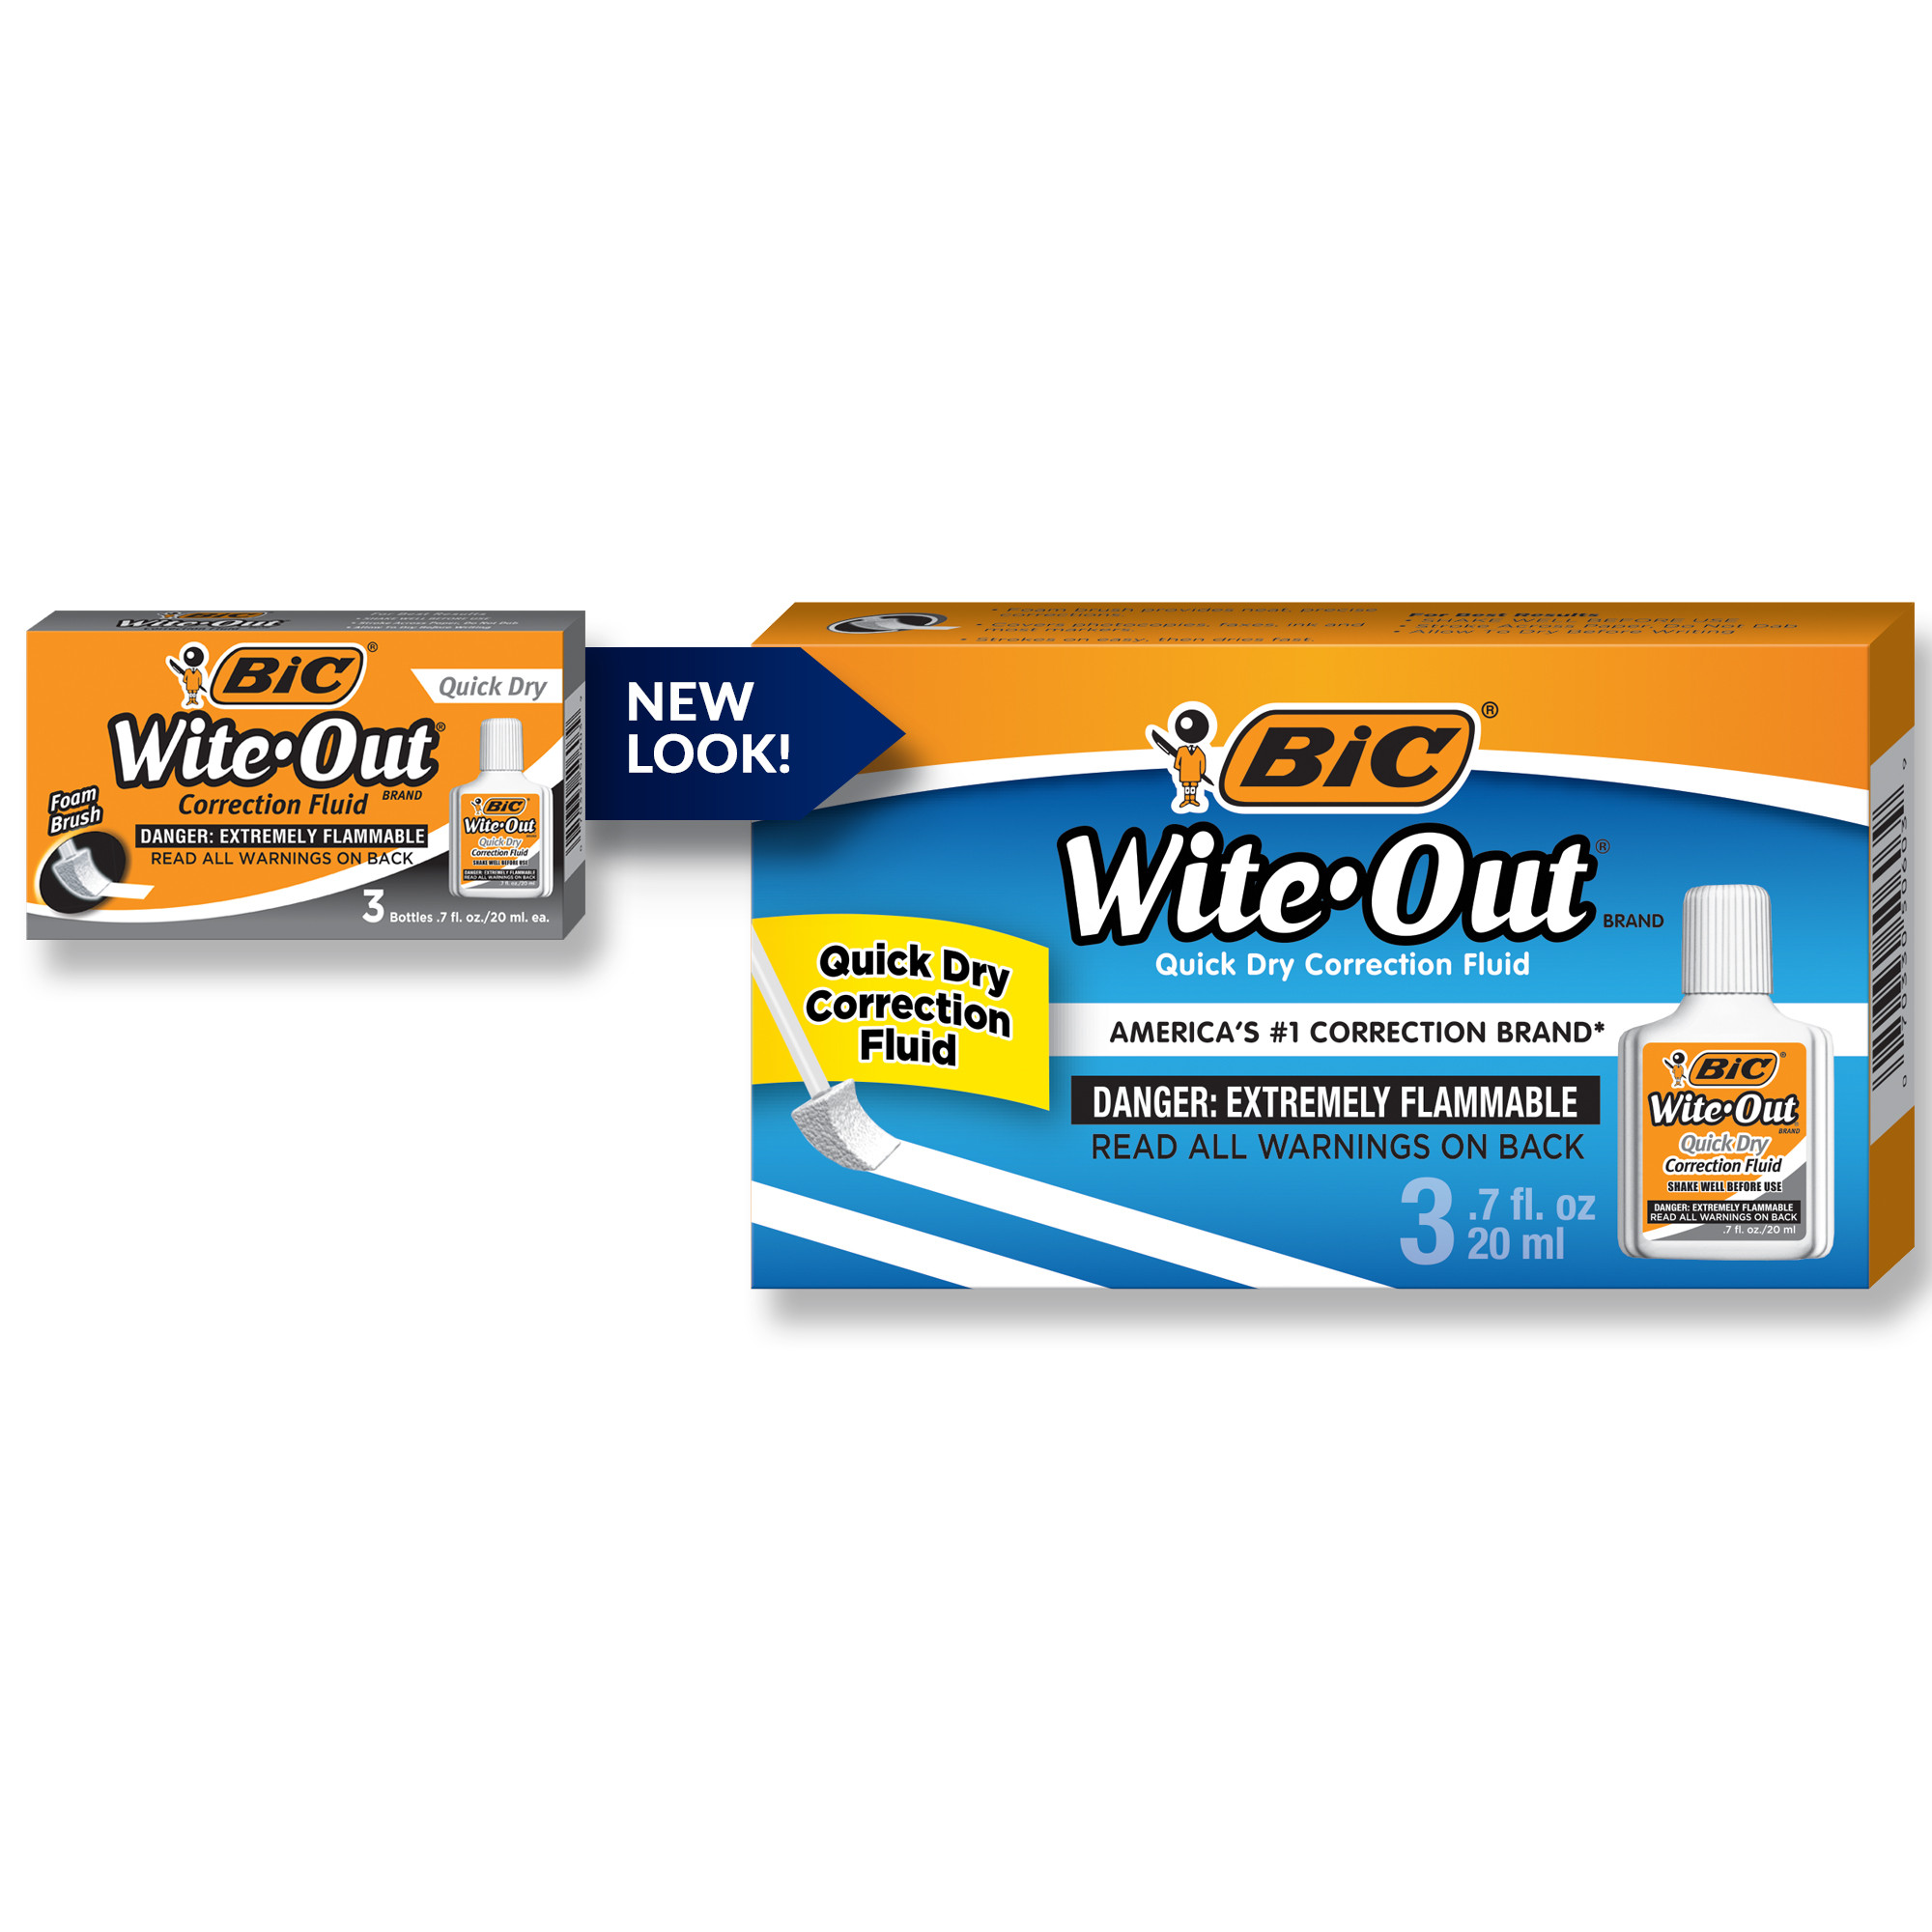 BIC Wite-Out Brand Quick Dry Correction Fluid, 20 ml, White, 3 Count - image 3 of 10